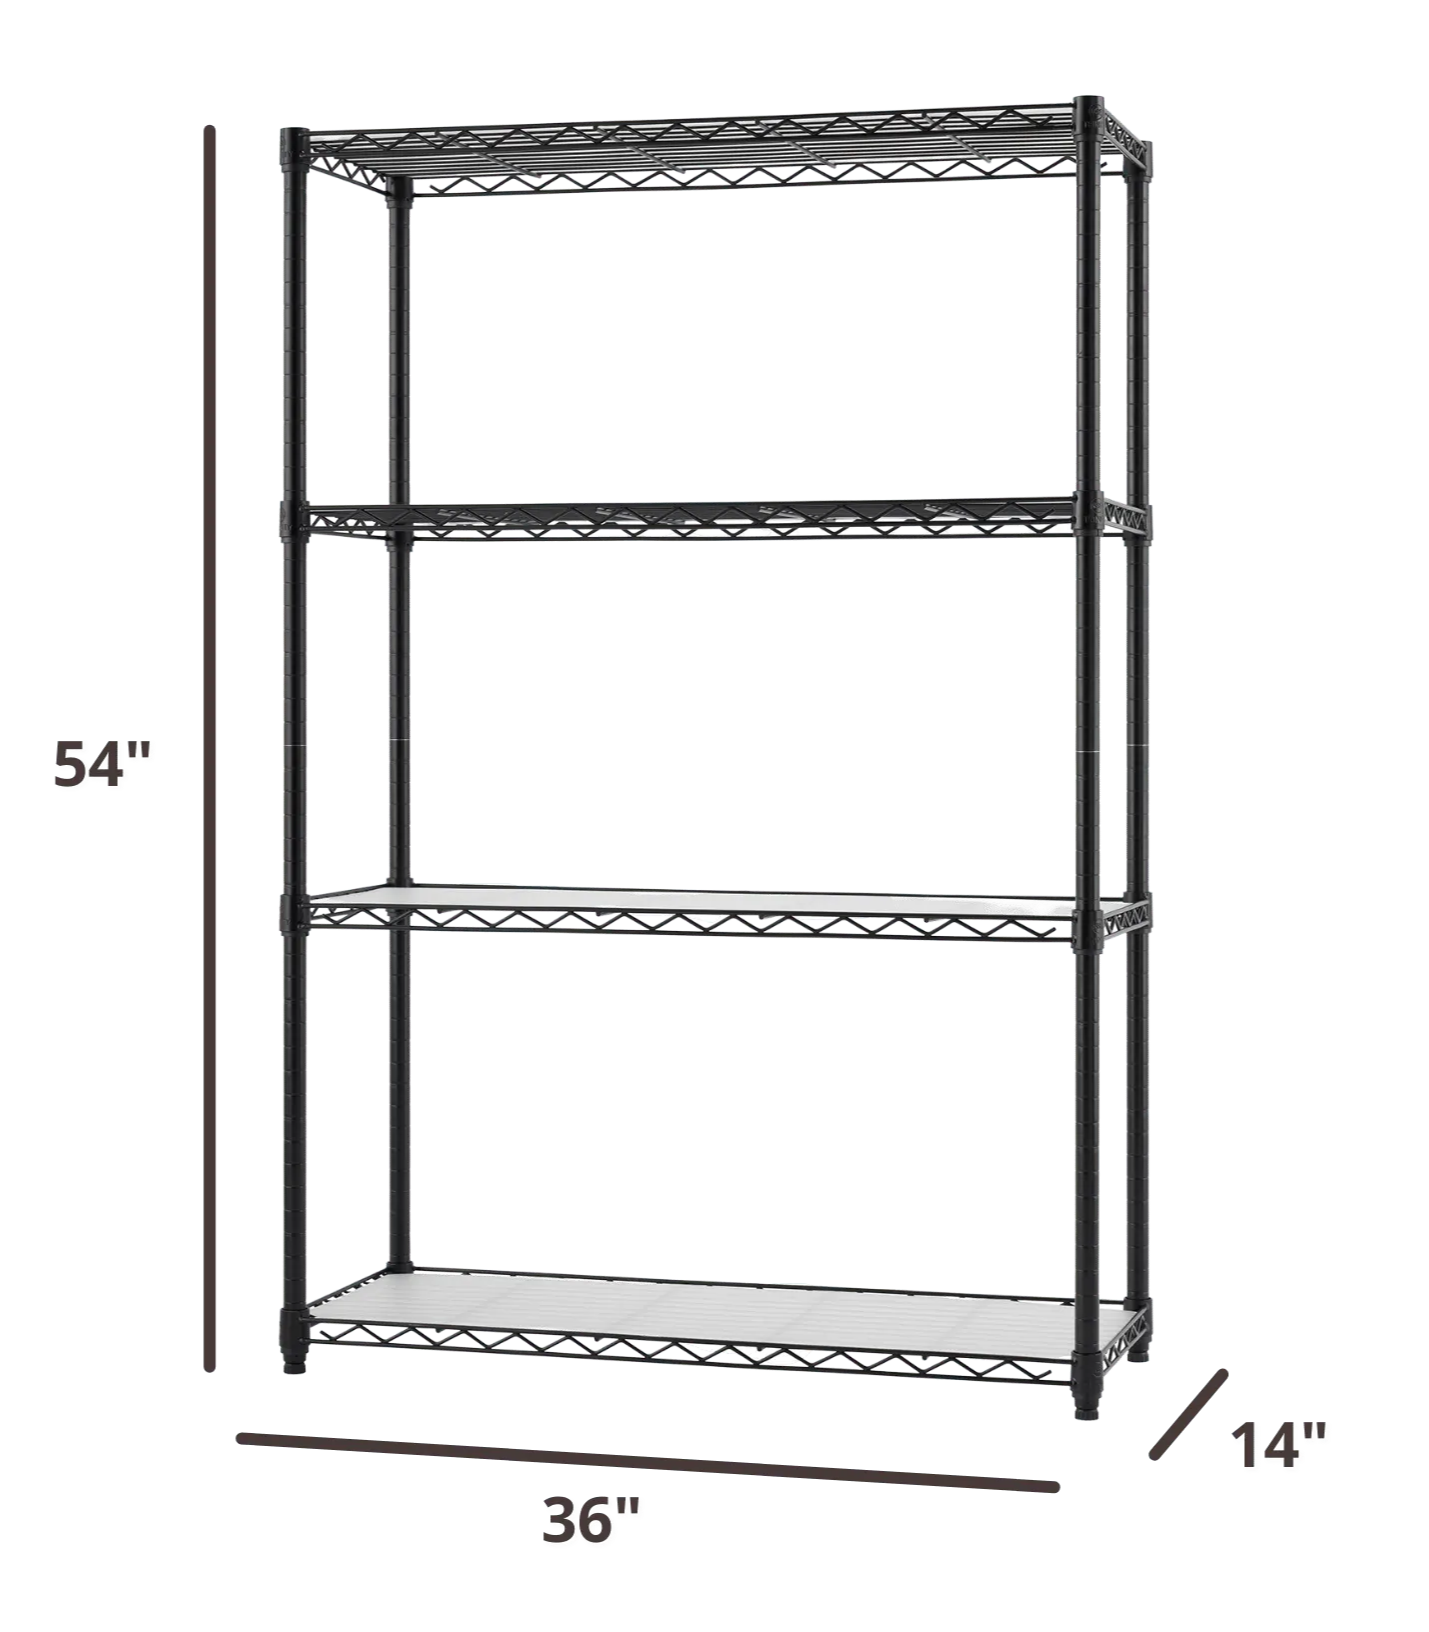 54 inches tall by 36 inches wide black wire shelving rack